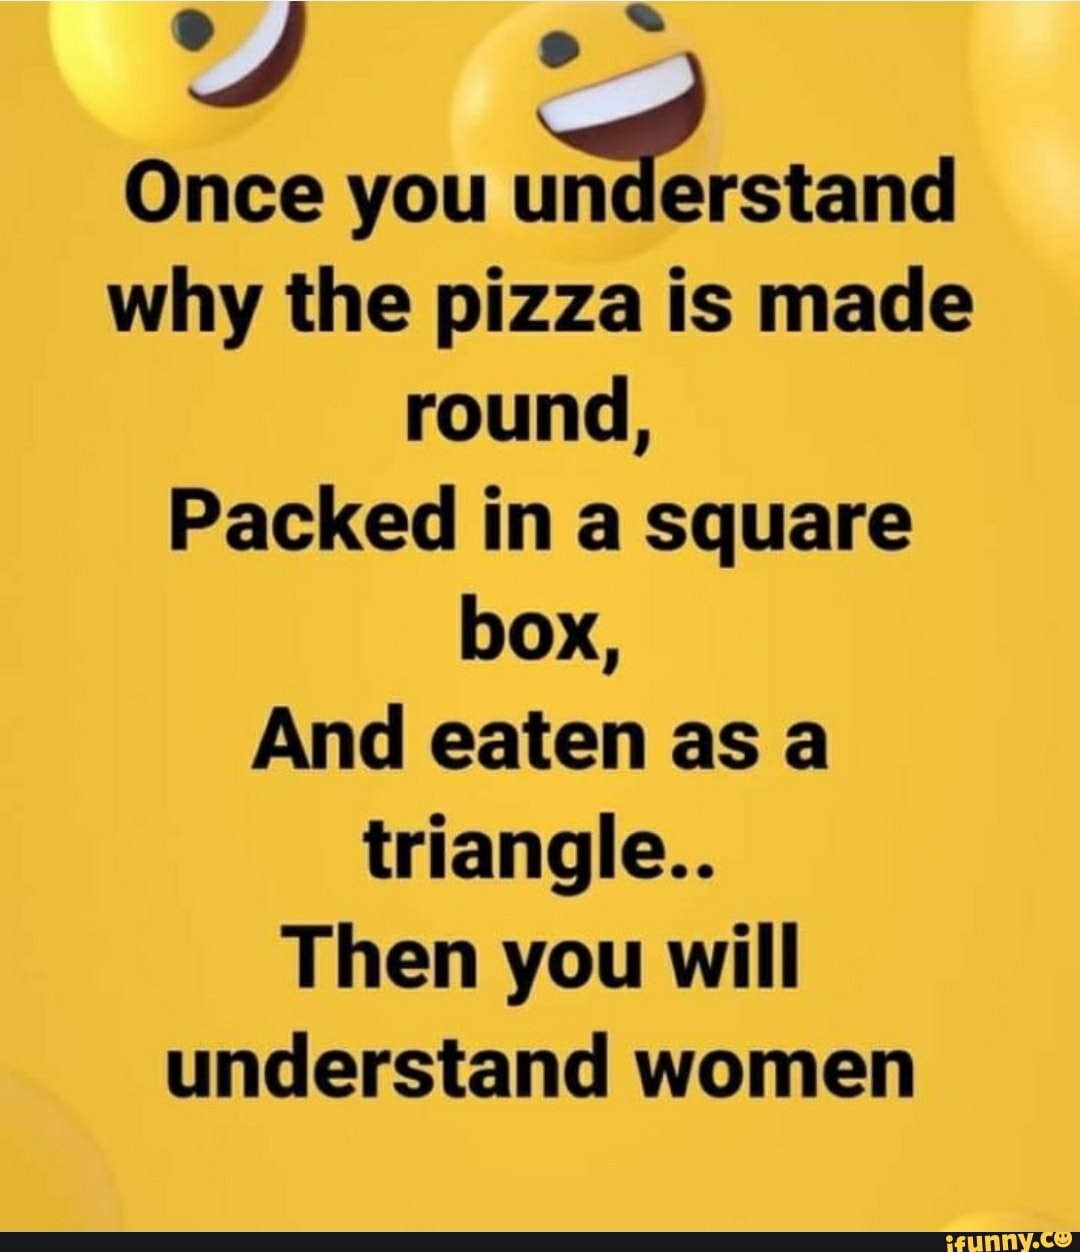 Top 93+ Images why is pizza round in a square box and eaten in triangles Sharp